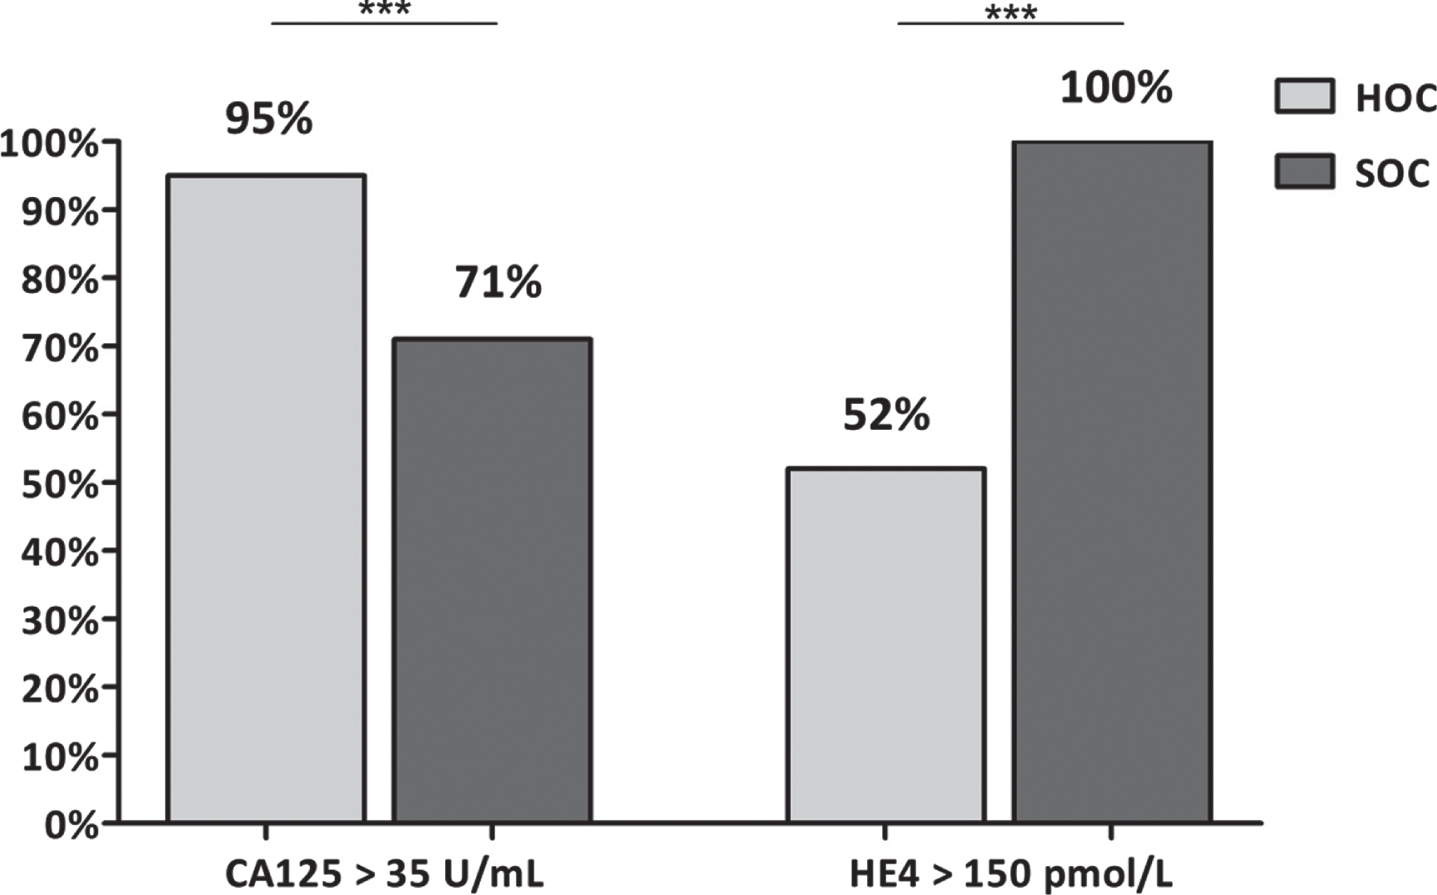 Percentage of HOC and SOC patients with high CA125 and He4 values. A statistically positive difference is observed in the positive percentages of HE4 and CA125 in the different patient groups. (p < 0.002).